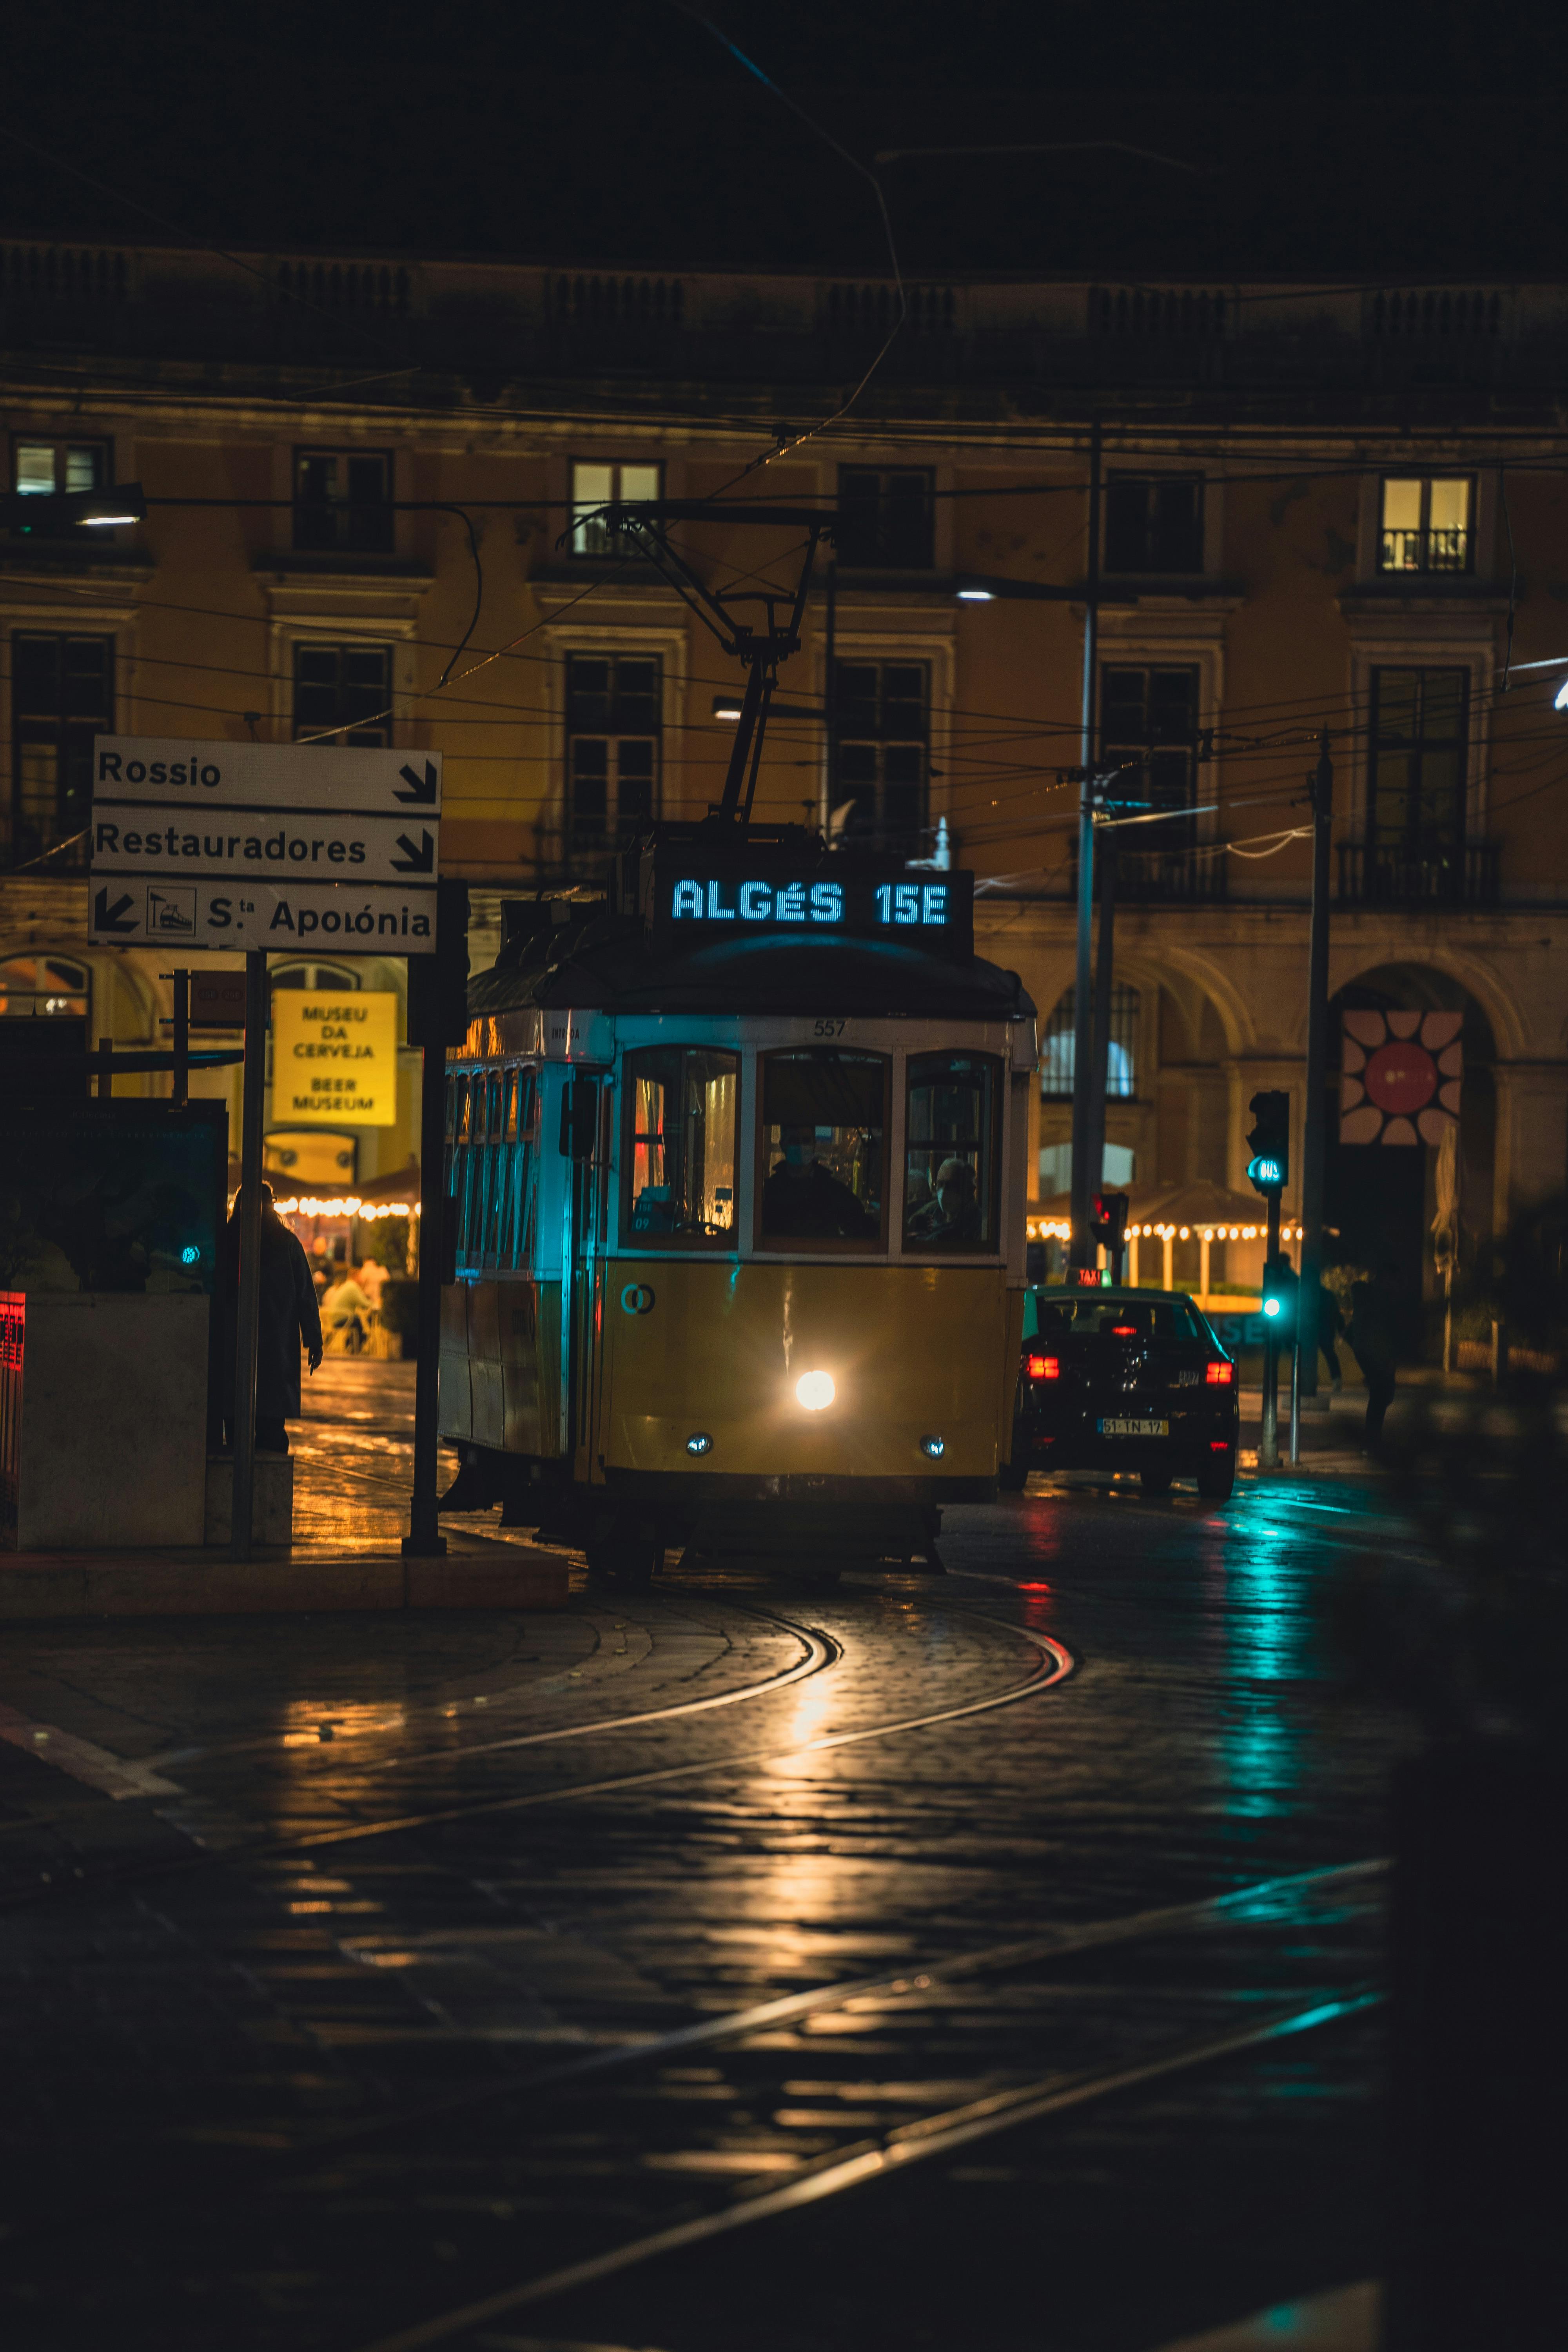 a tram on the street at night